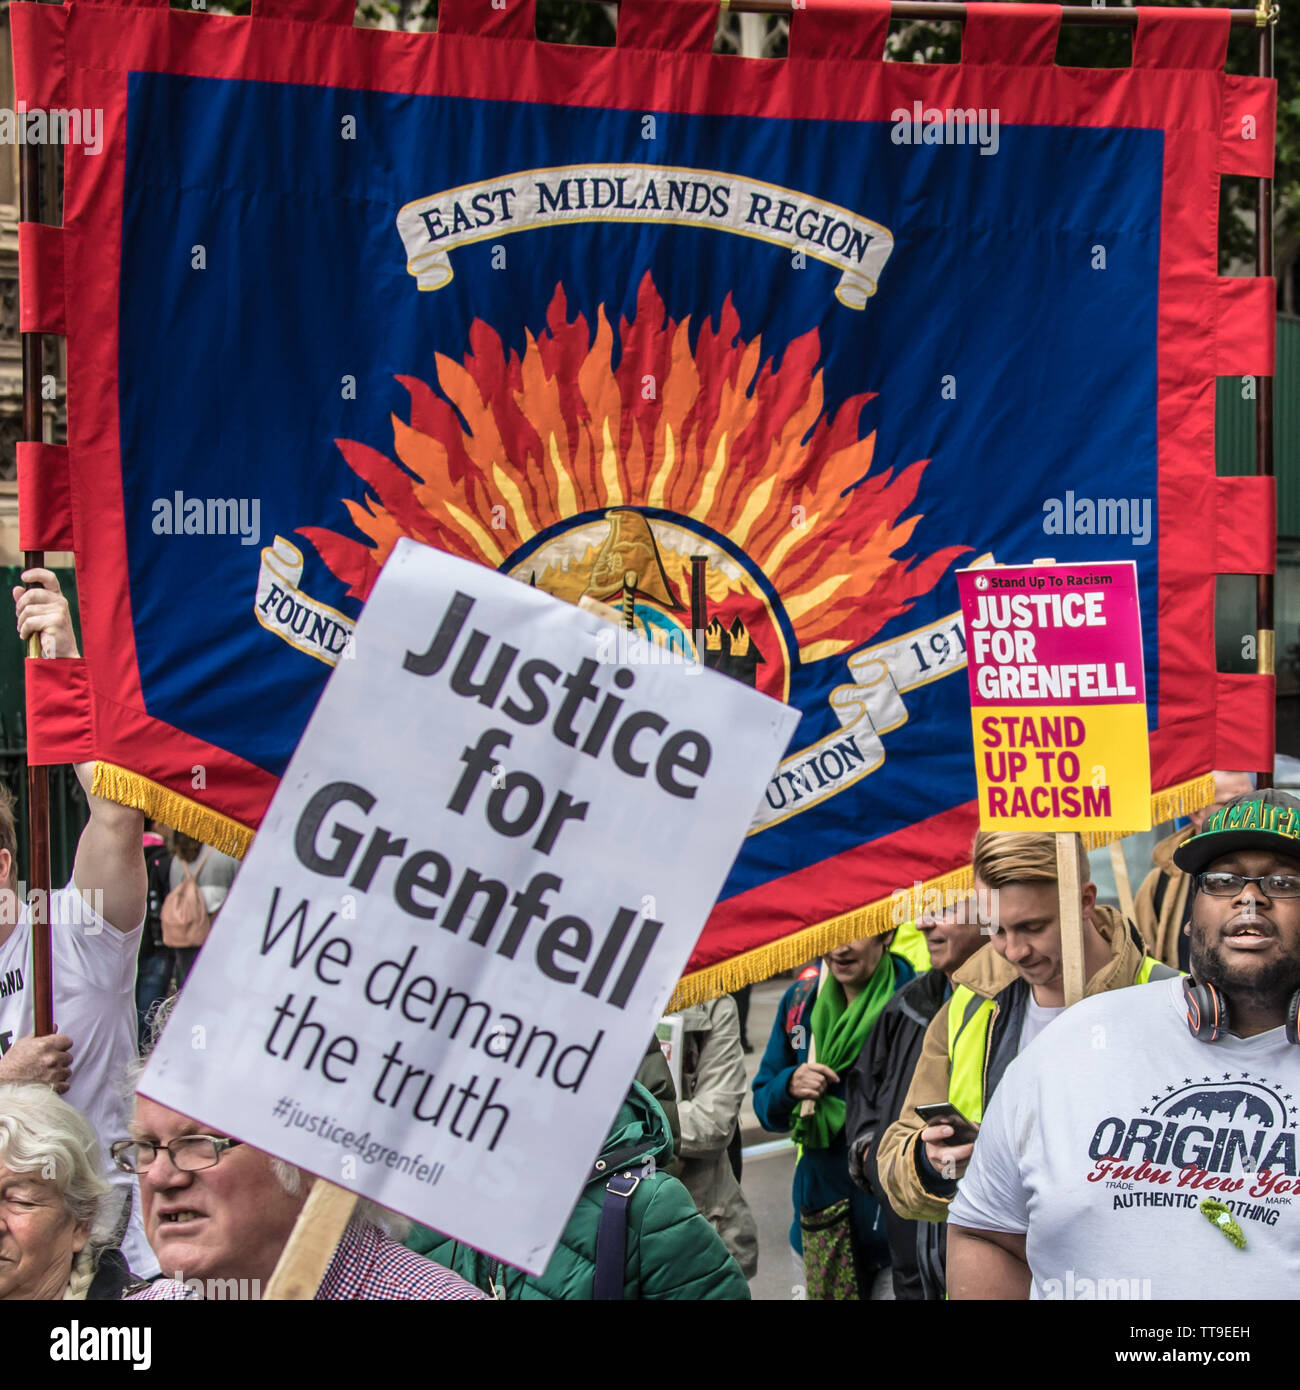 London, UK, 15 June, 2019. East Midlands FBU banner. Hundreds of demonstrators staged a protest in central London to demand justice on the second anniversary of the Grenfell Tower fire. David Rowe/ Alamy Live News Stock Photo